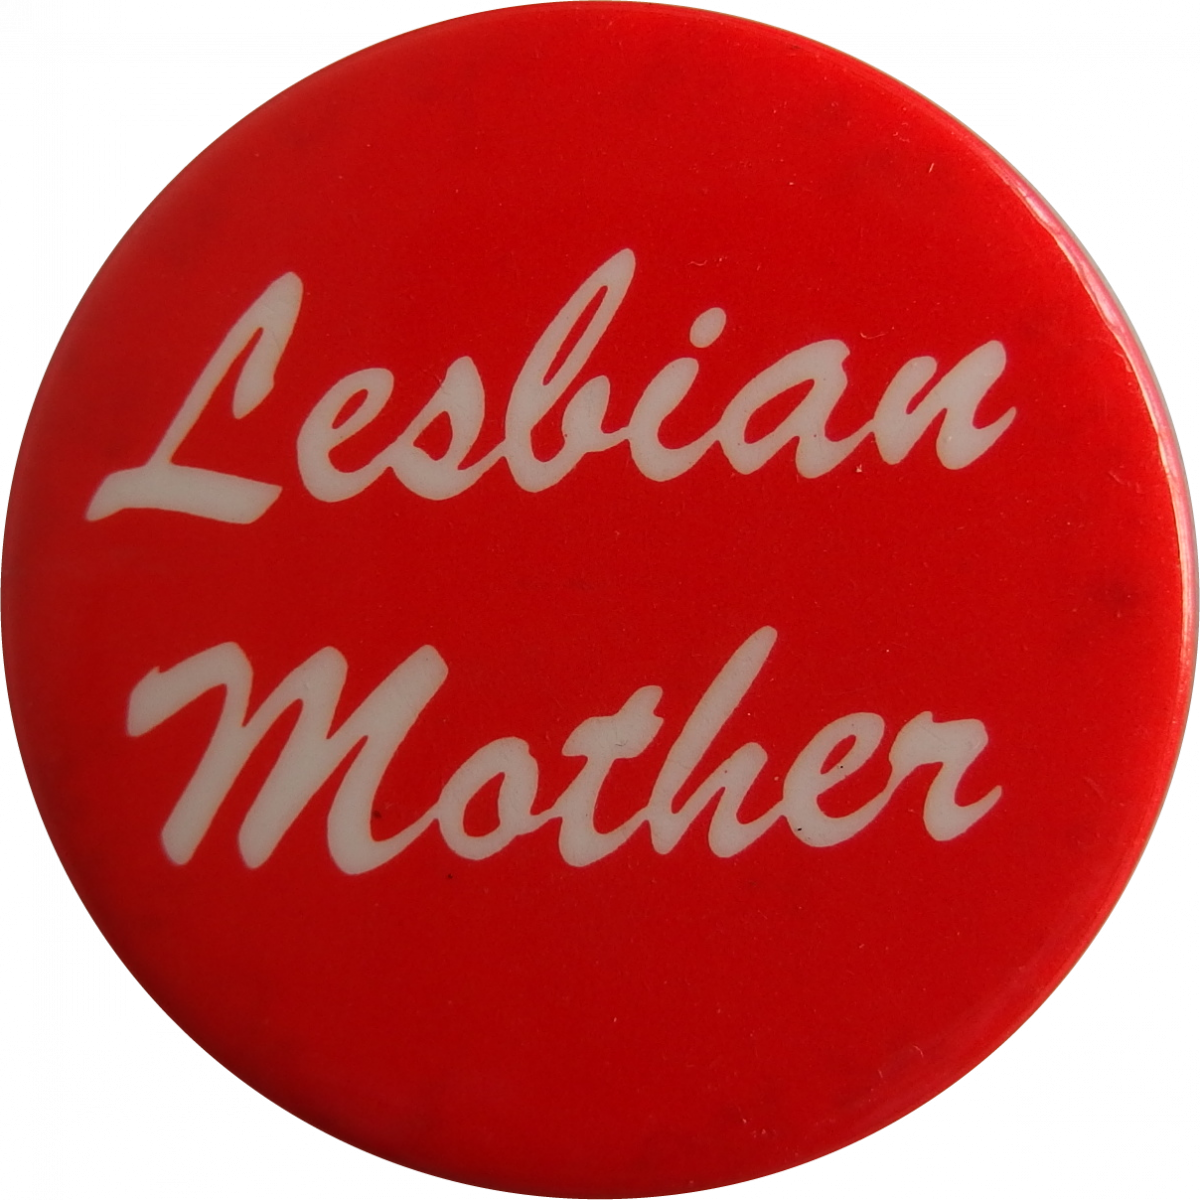 Lesbian Mother, (n.d.), 5-46-7 Badge Collection